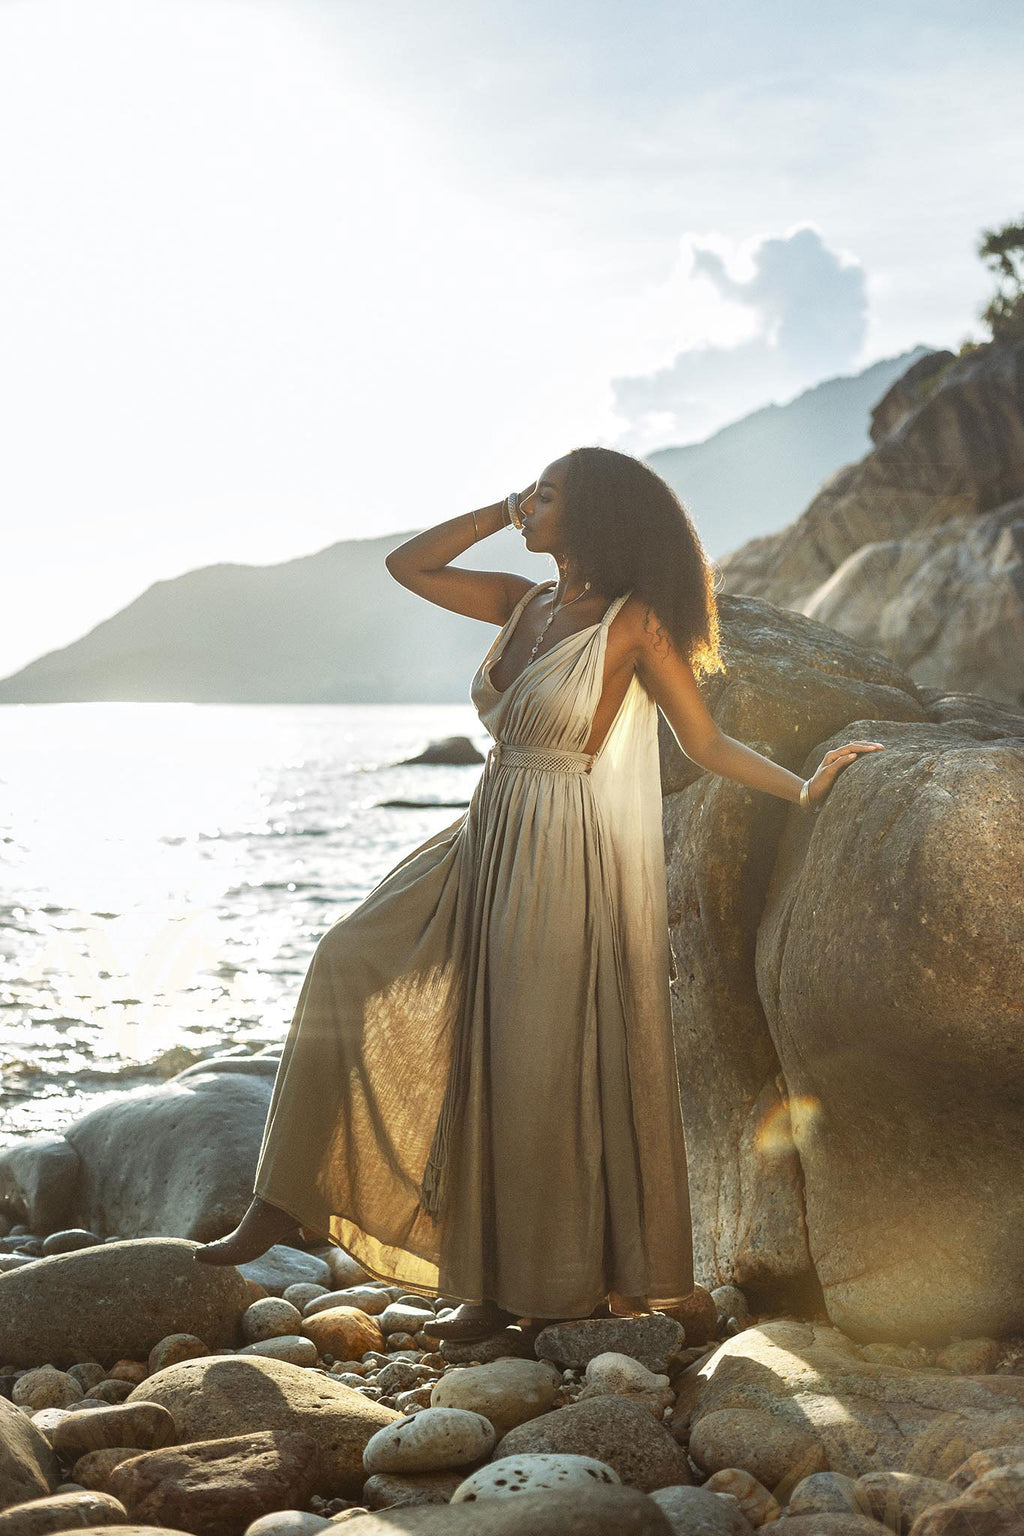 A dark green dress with a flowing silhouette, inspired by Greek goddesses